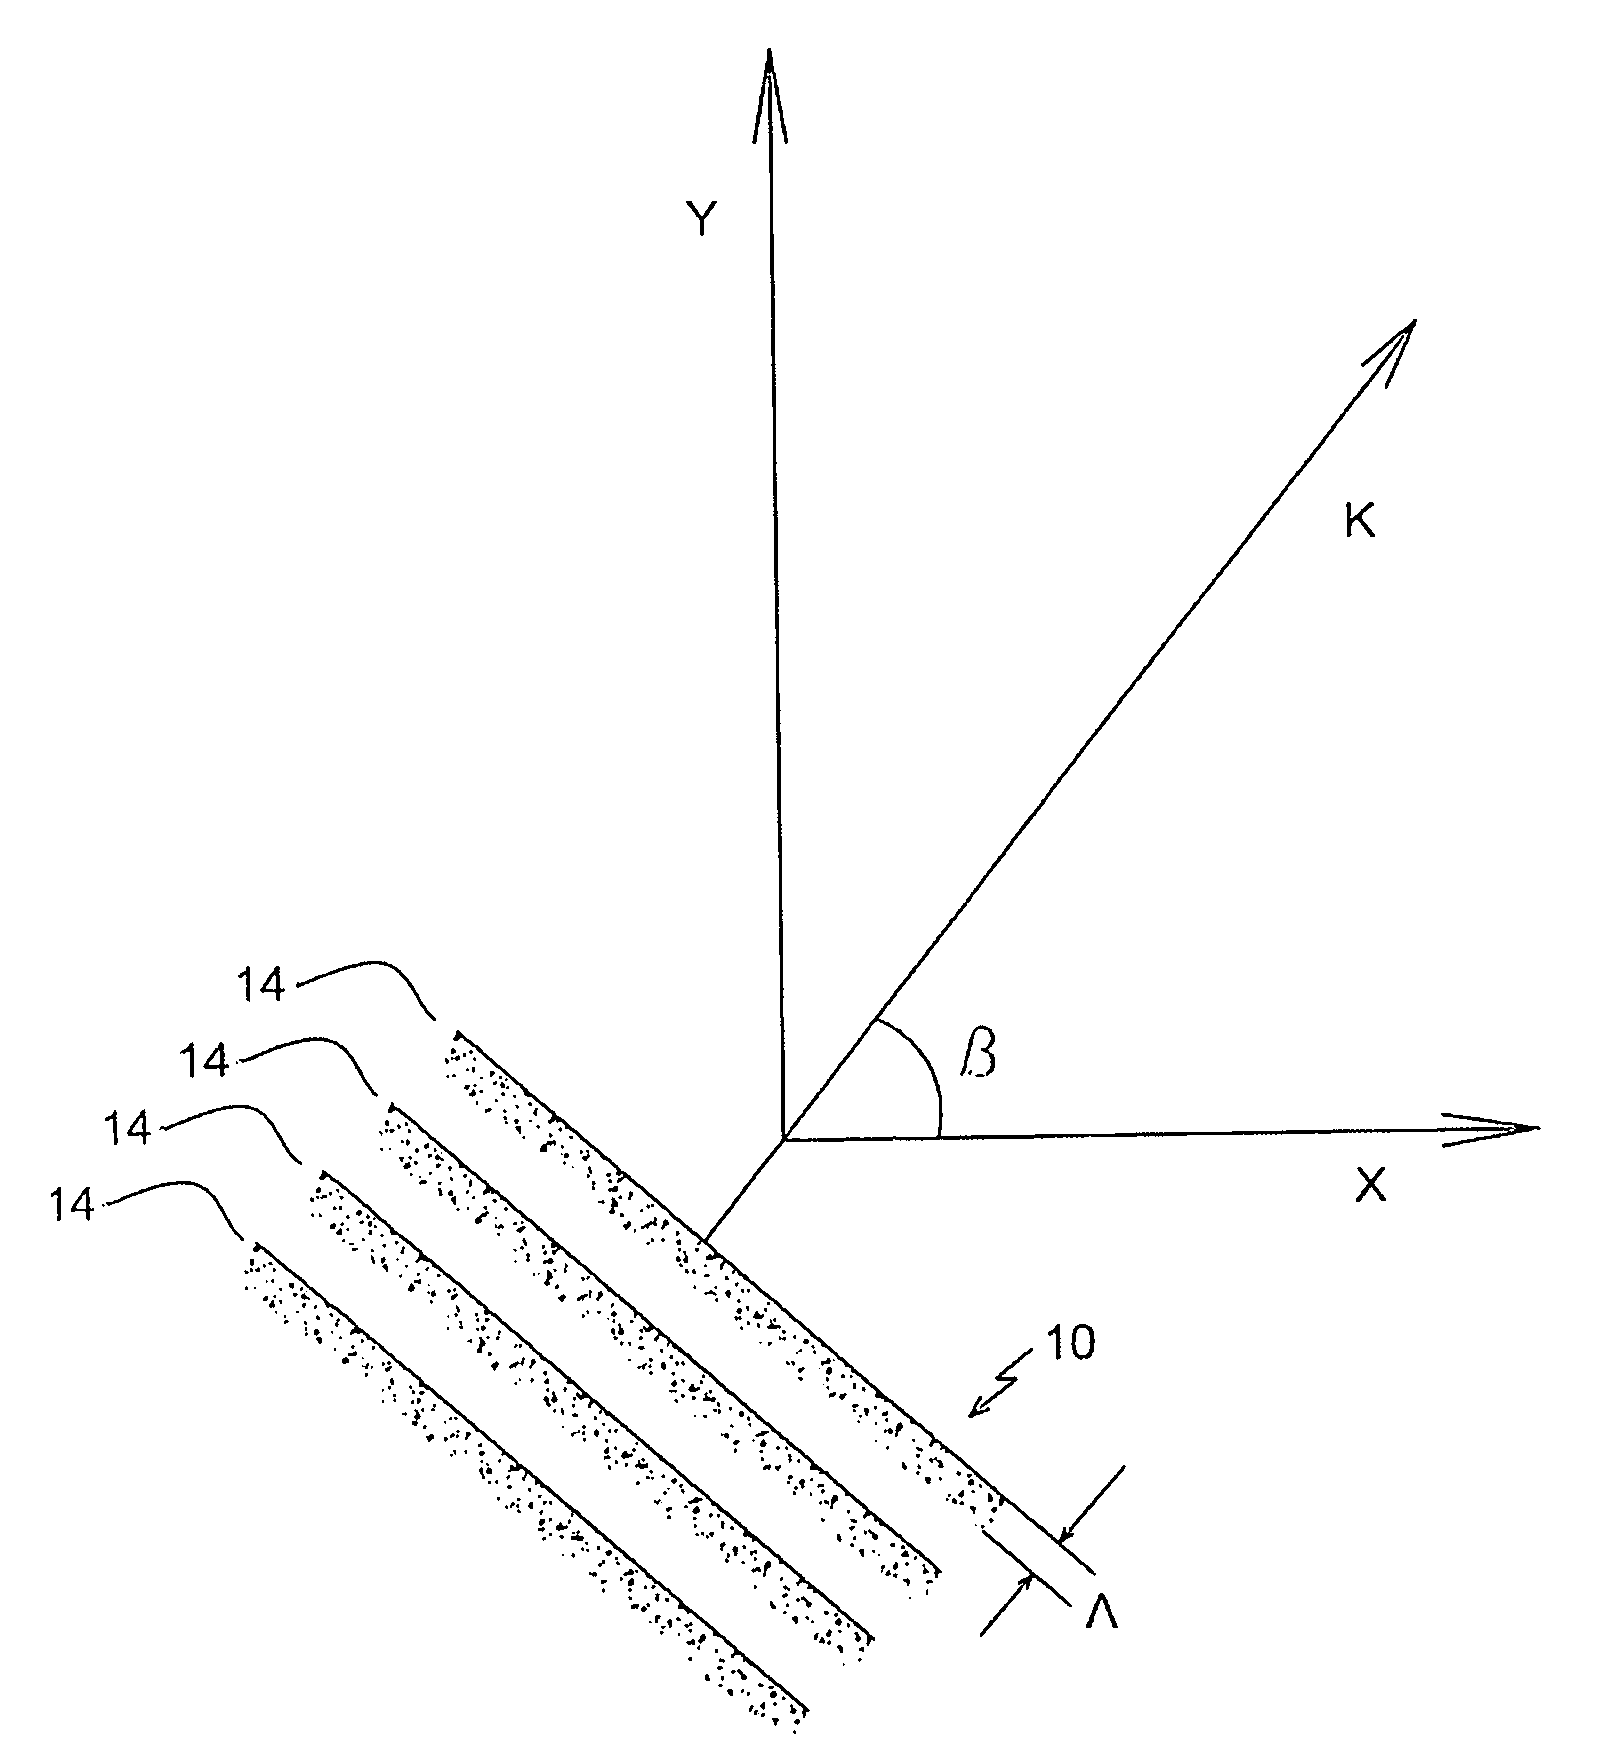 Space-variant subwavelength dielectric grating and applications thereof